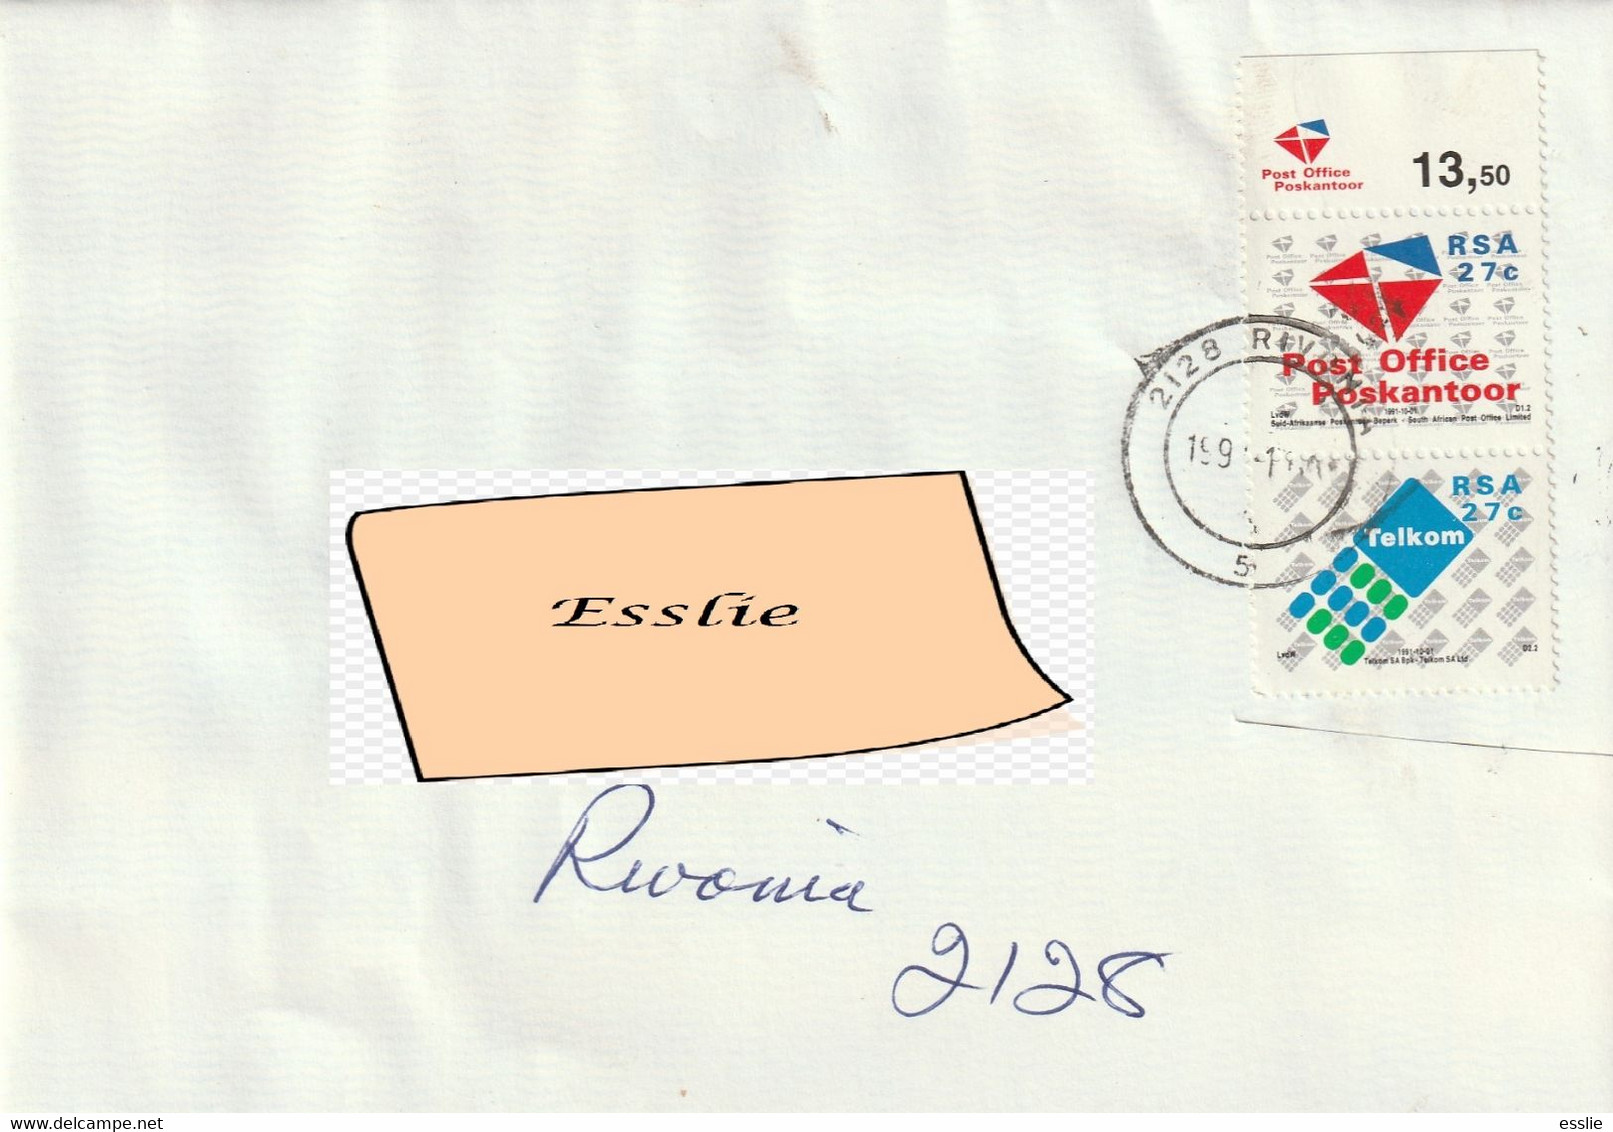 South Africa RSA - 1991 - Creation Of Post Office And Telkom Limited Cover - Storia Postale